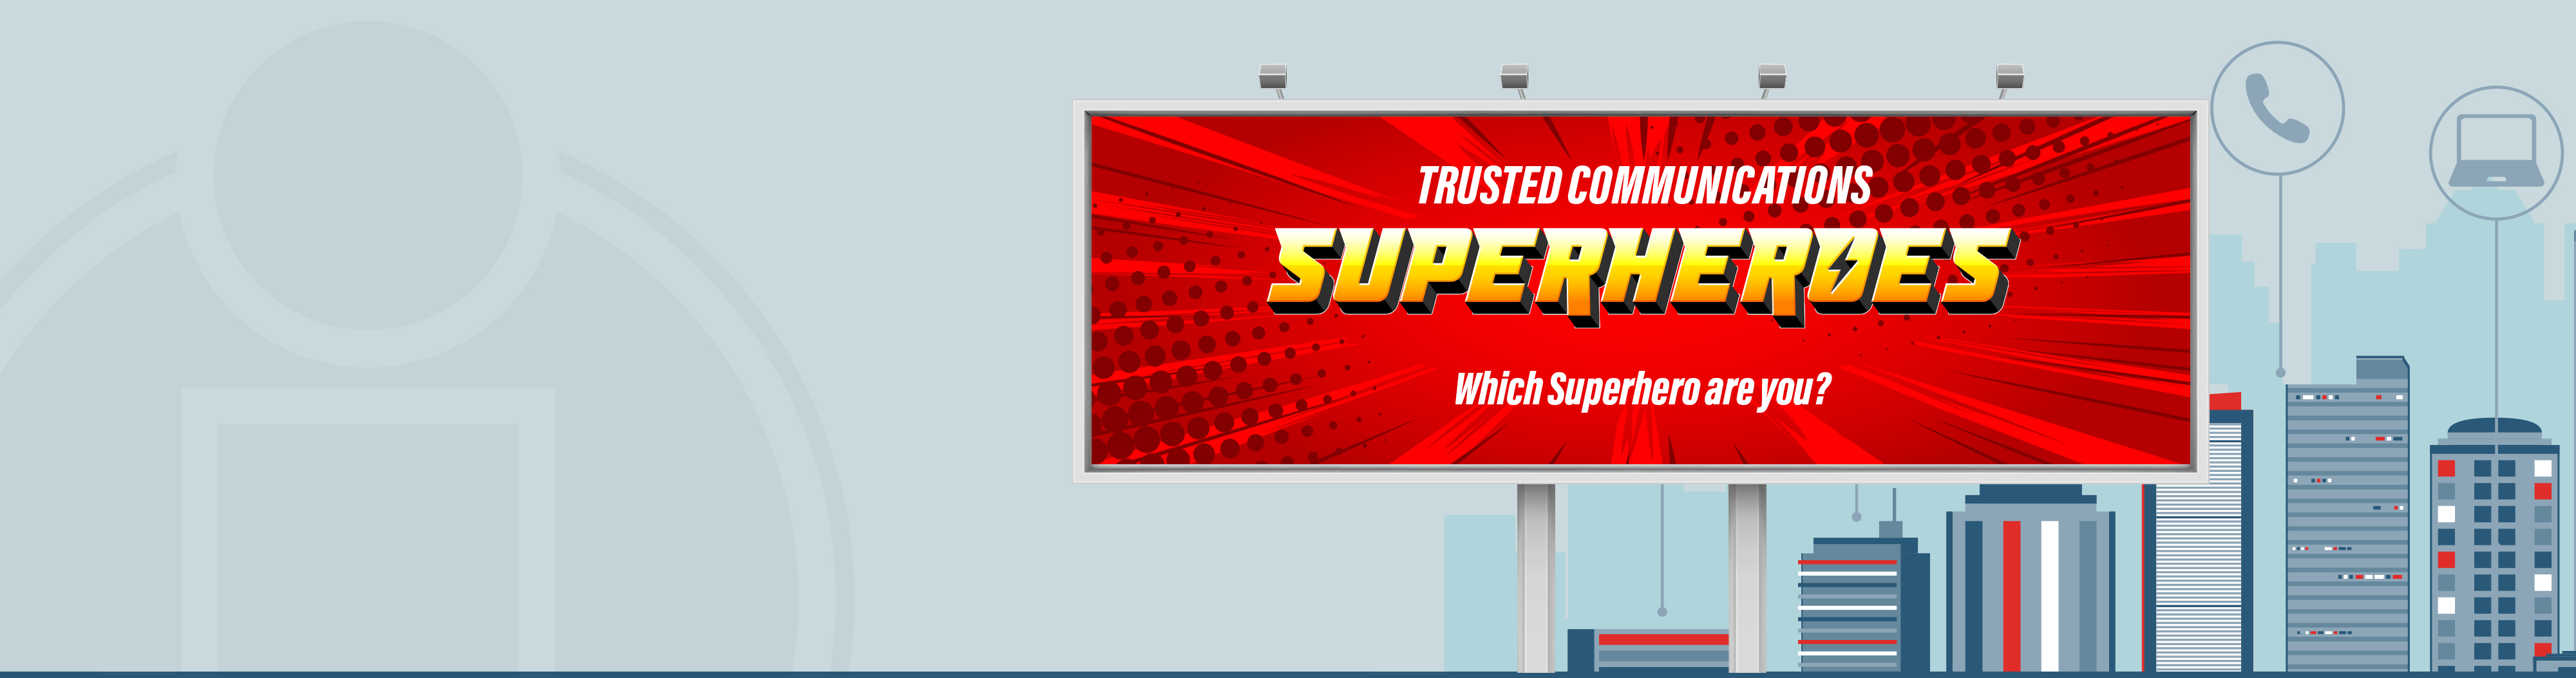 Trusted Communications Superheroes - Which superhero are you?